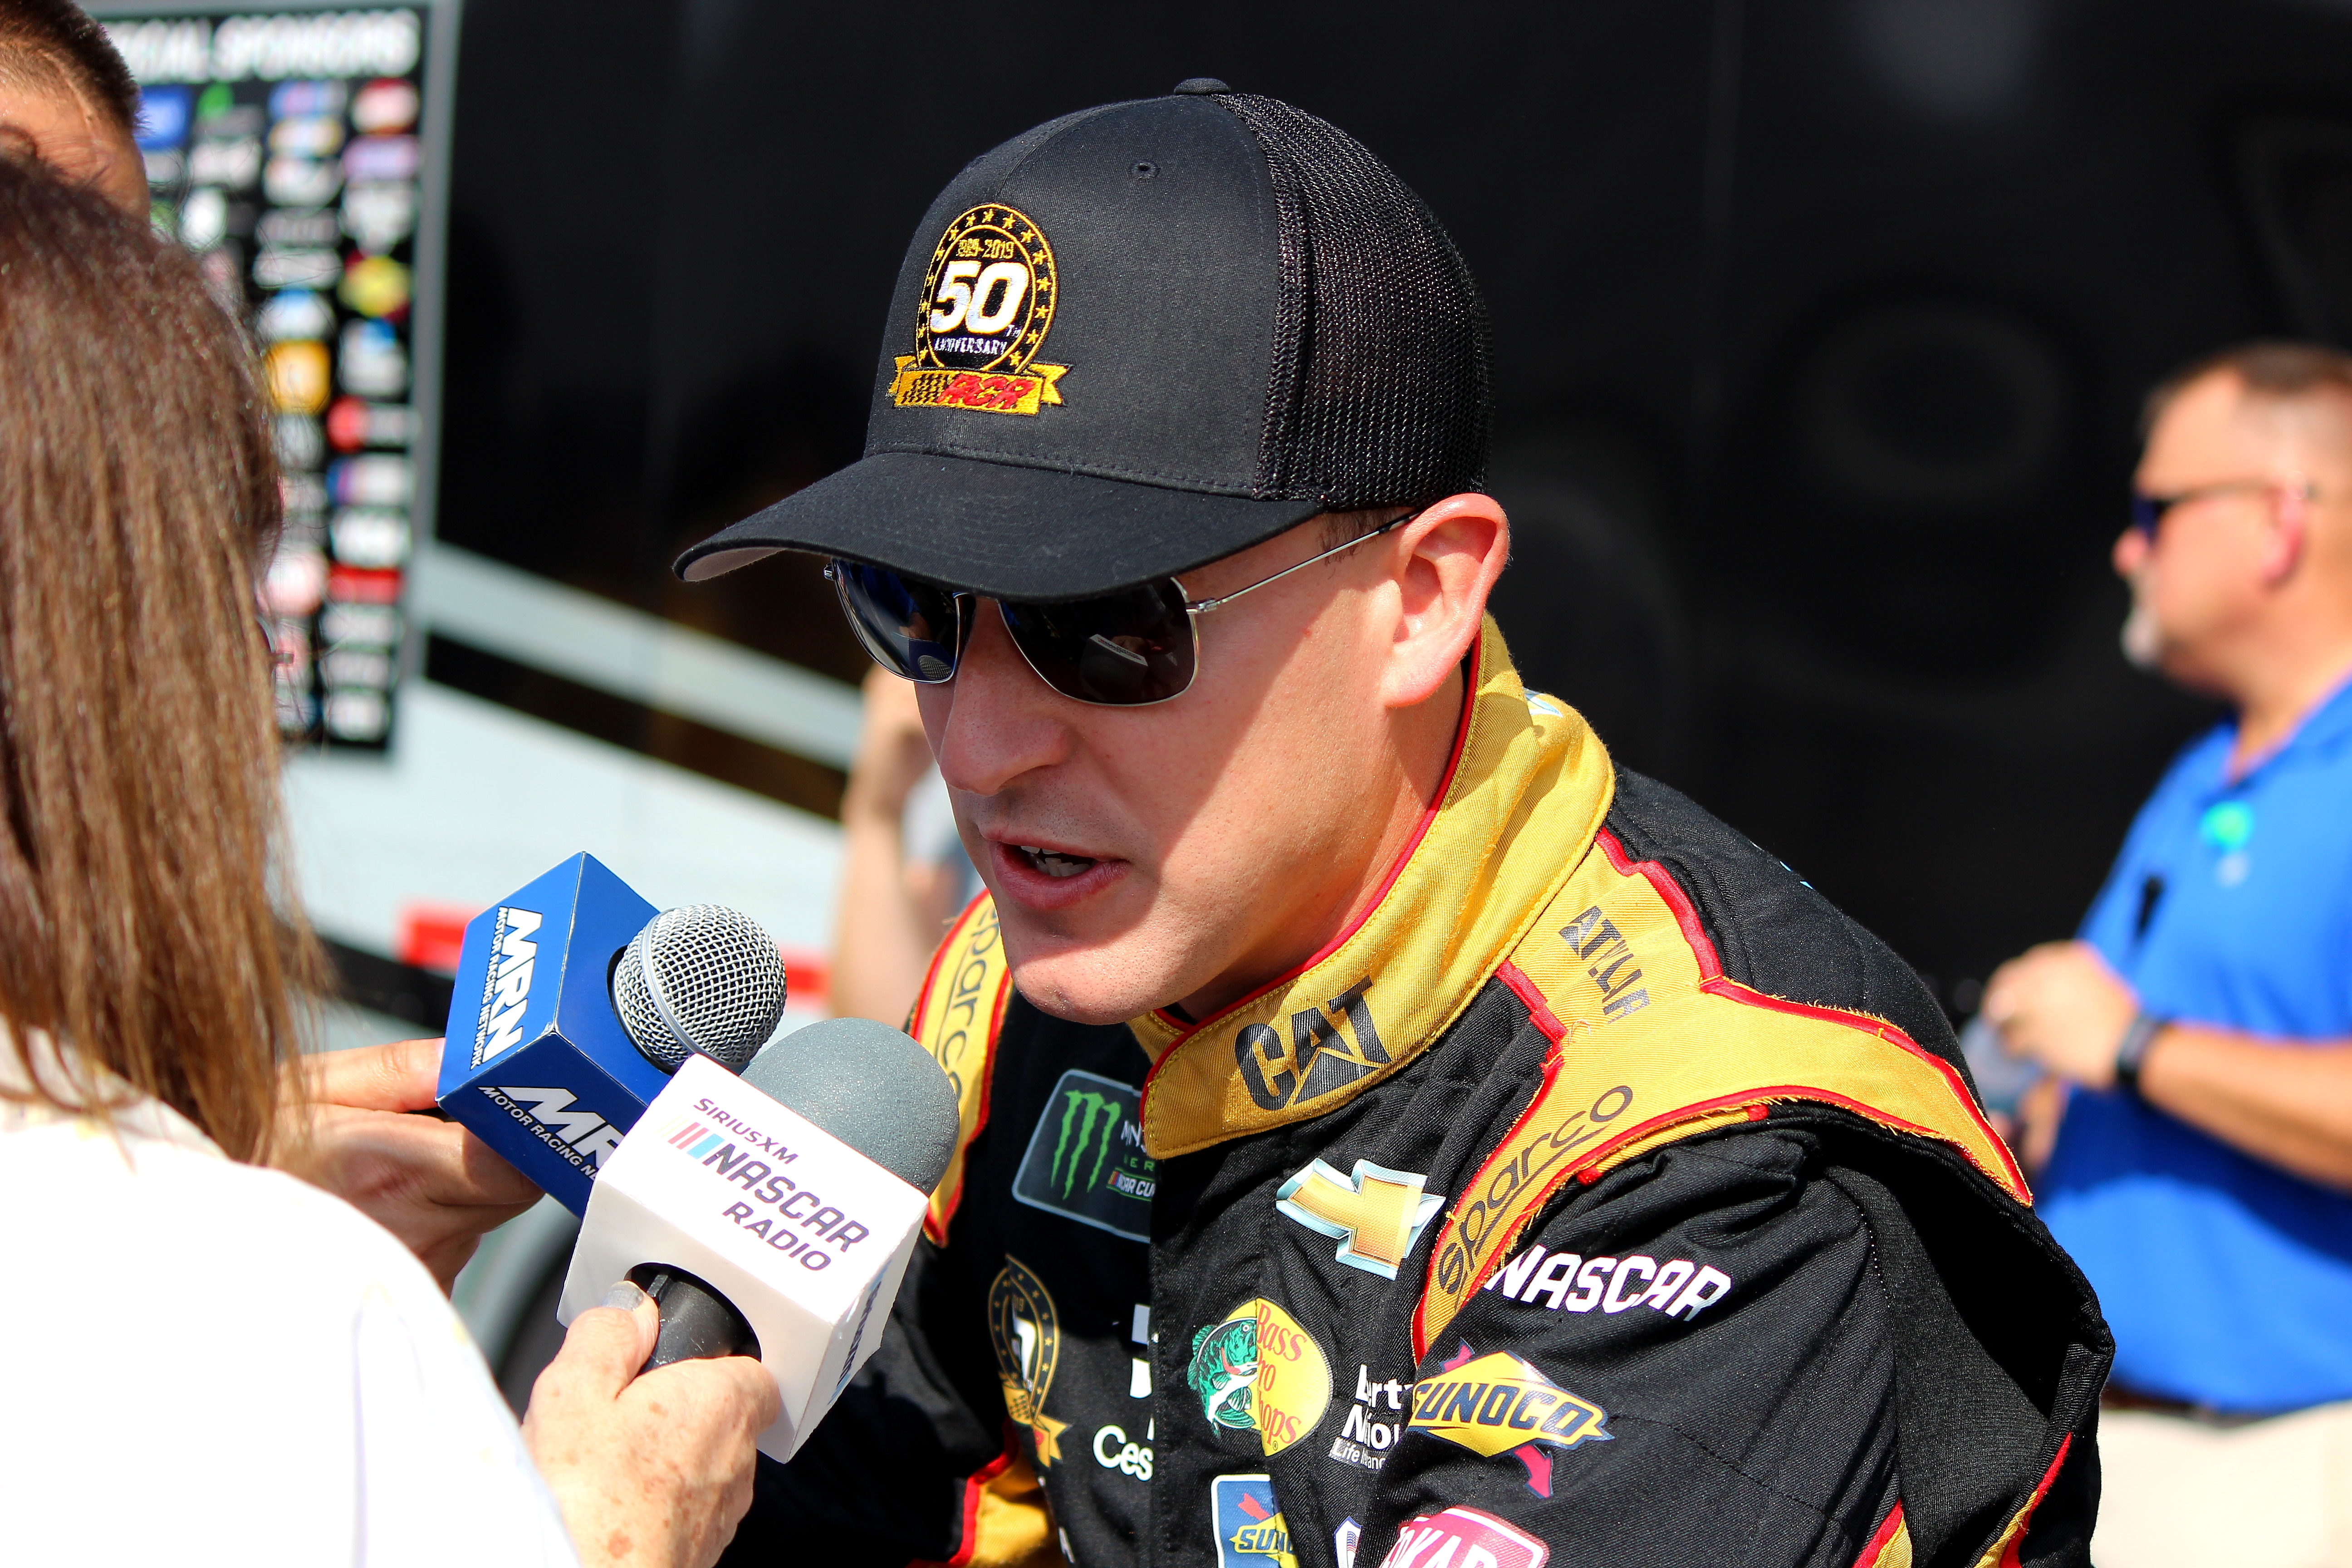 As shown above, Hemric presents a unique choice of actor if he had a Hollywood movie based on his life. (Photo Credit: Josh Jones/TPF)